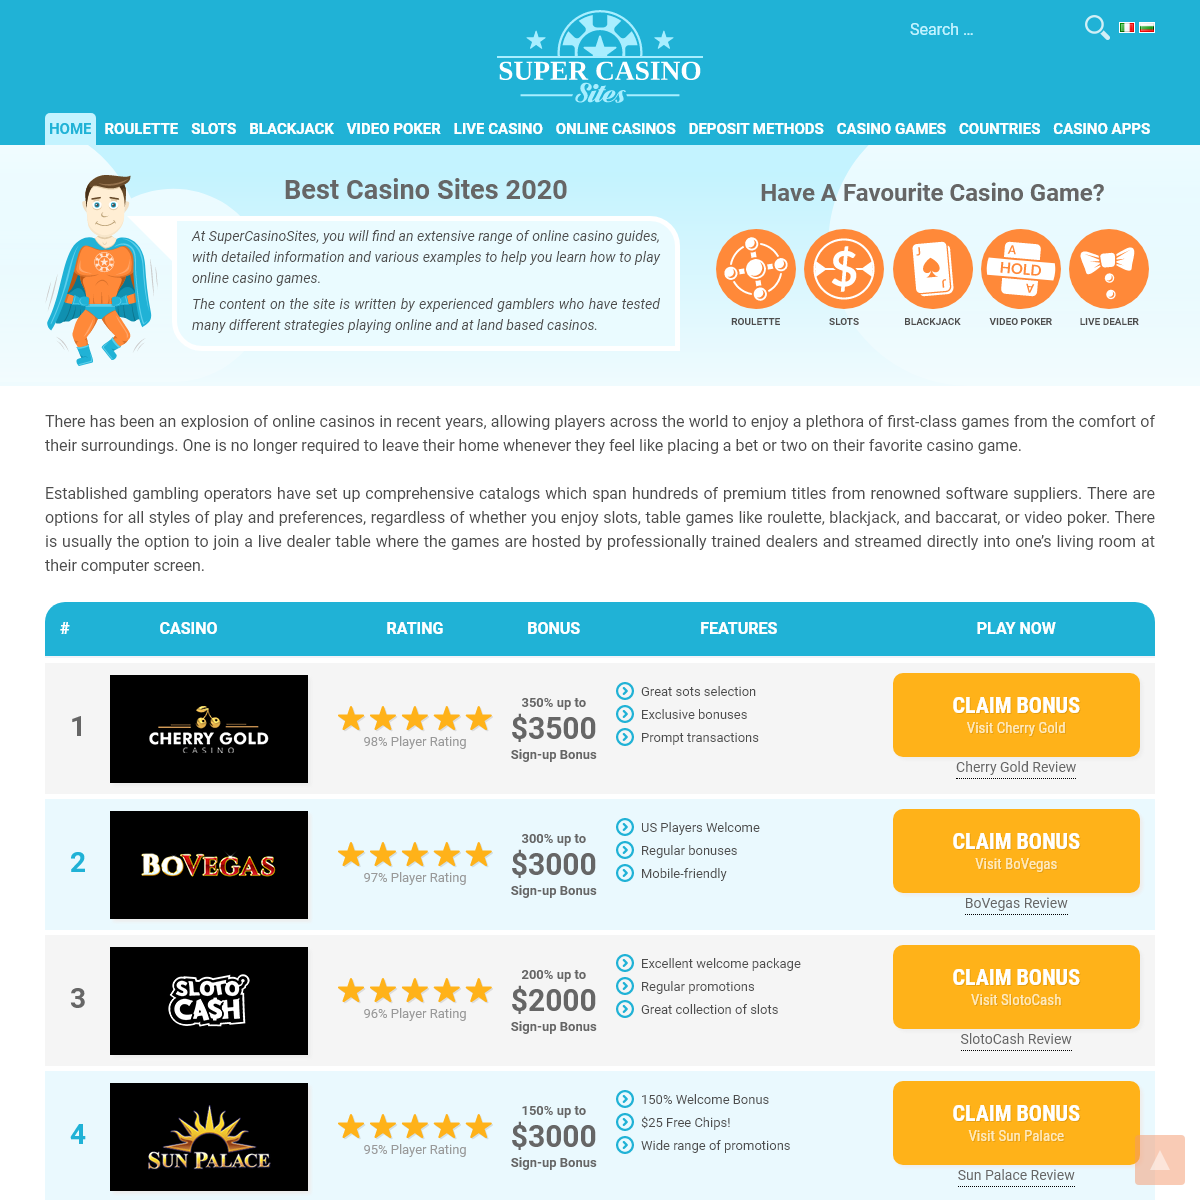 A complete backup of supercasinosites.com